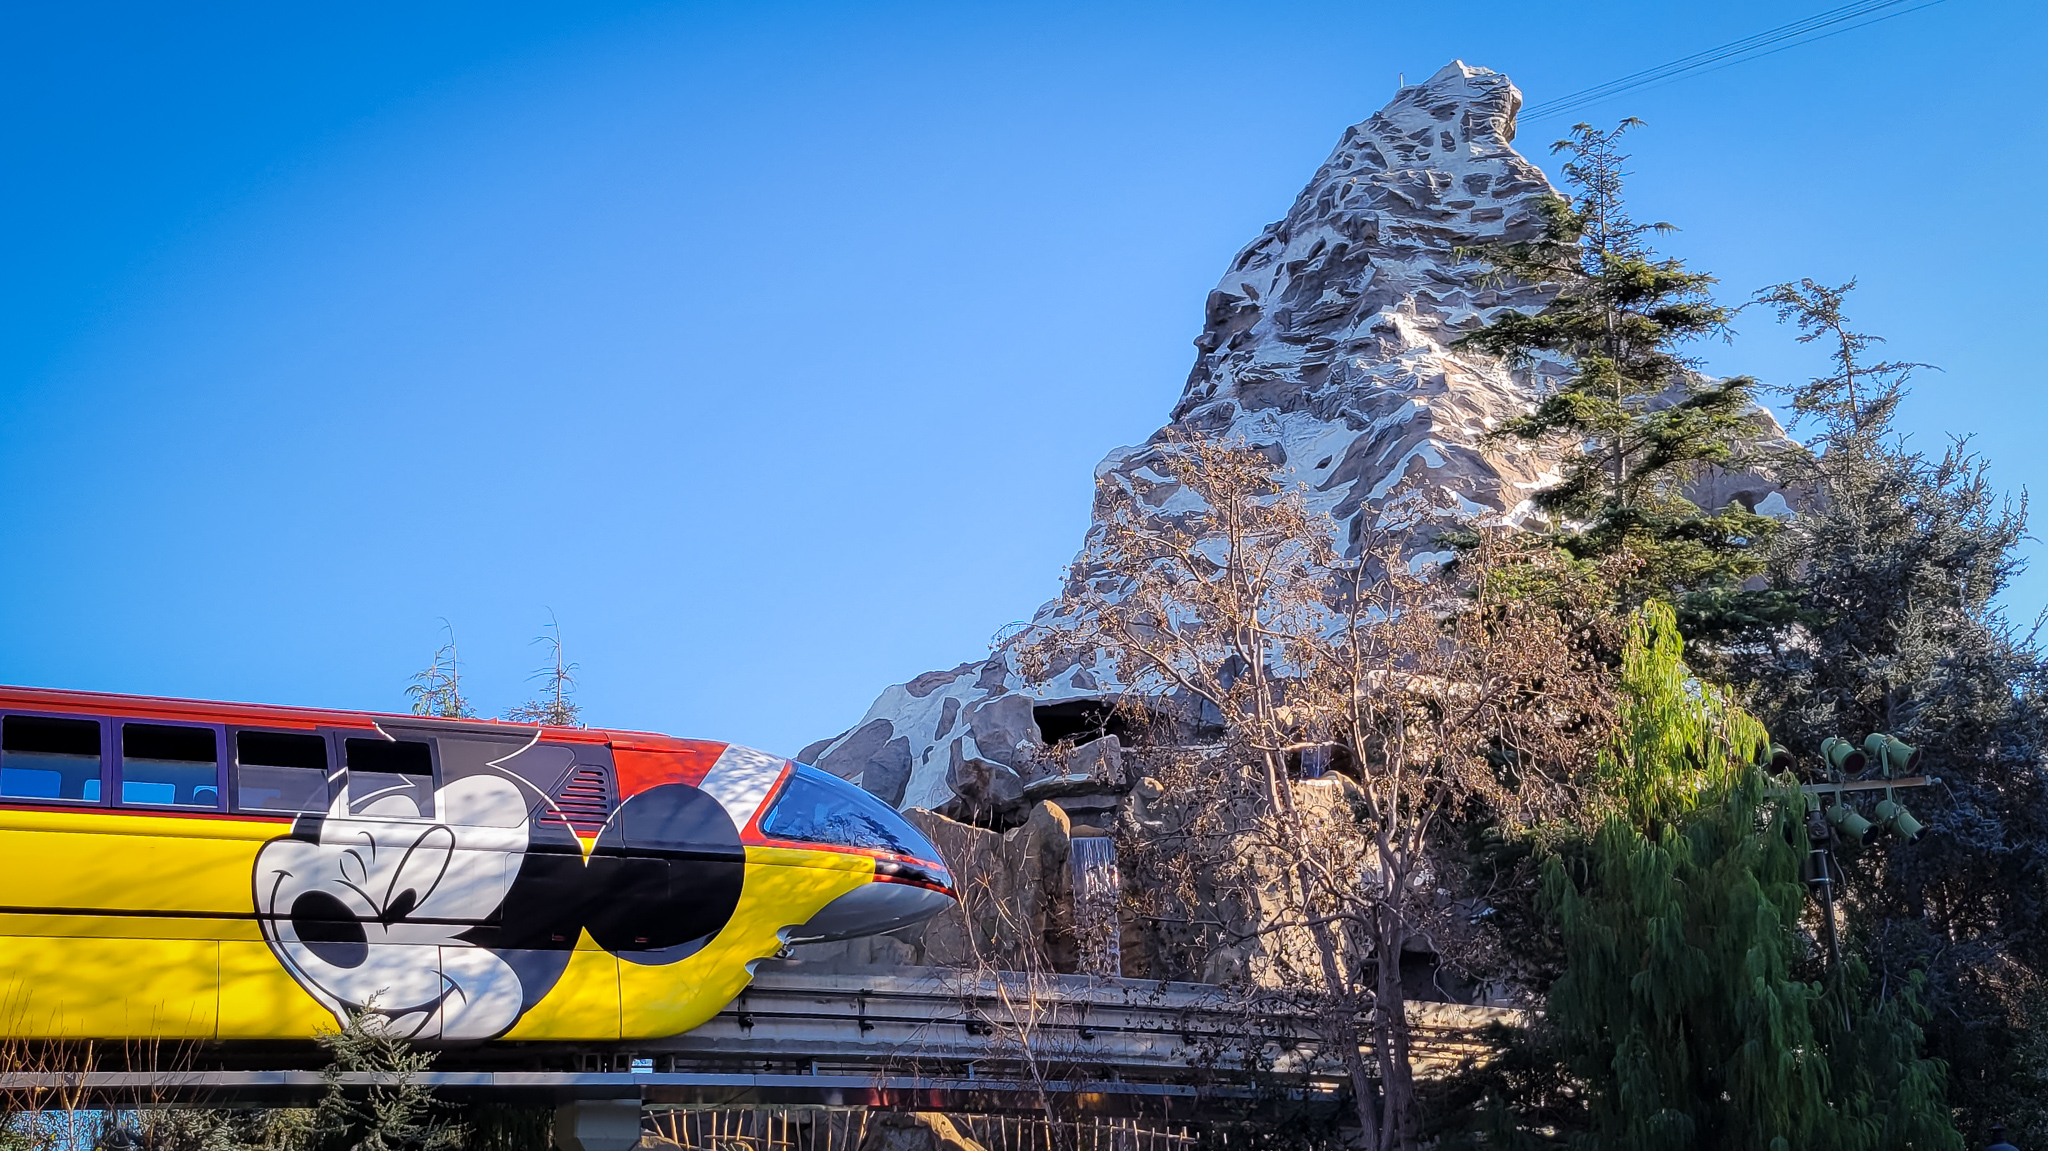 Monorail going past the Matterhorn at Disneyland. Mickey Mouse is on a red and yellow wrapped Matterhorn. Blue skies and a mixture of evergreen trees and trees bare with no leafs are seen.